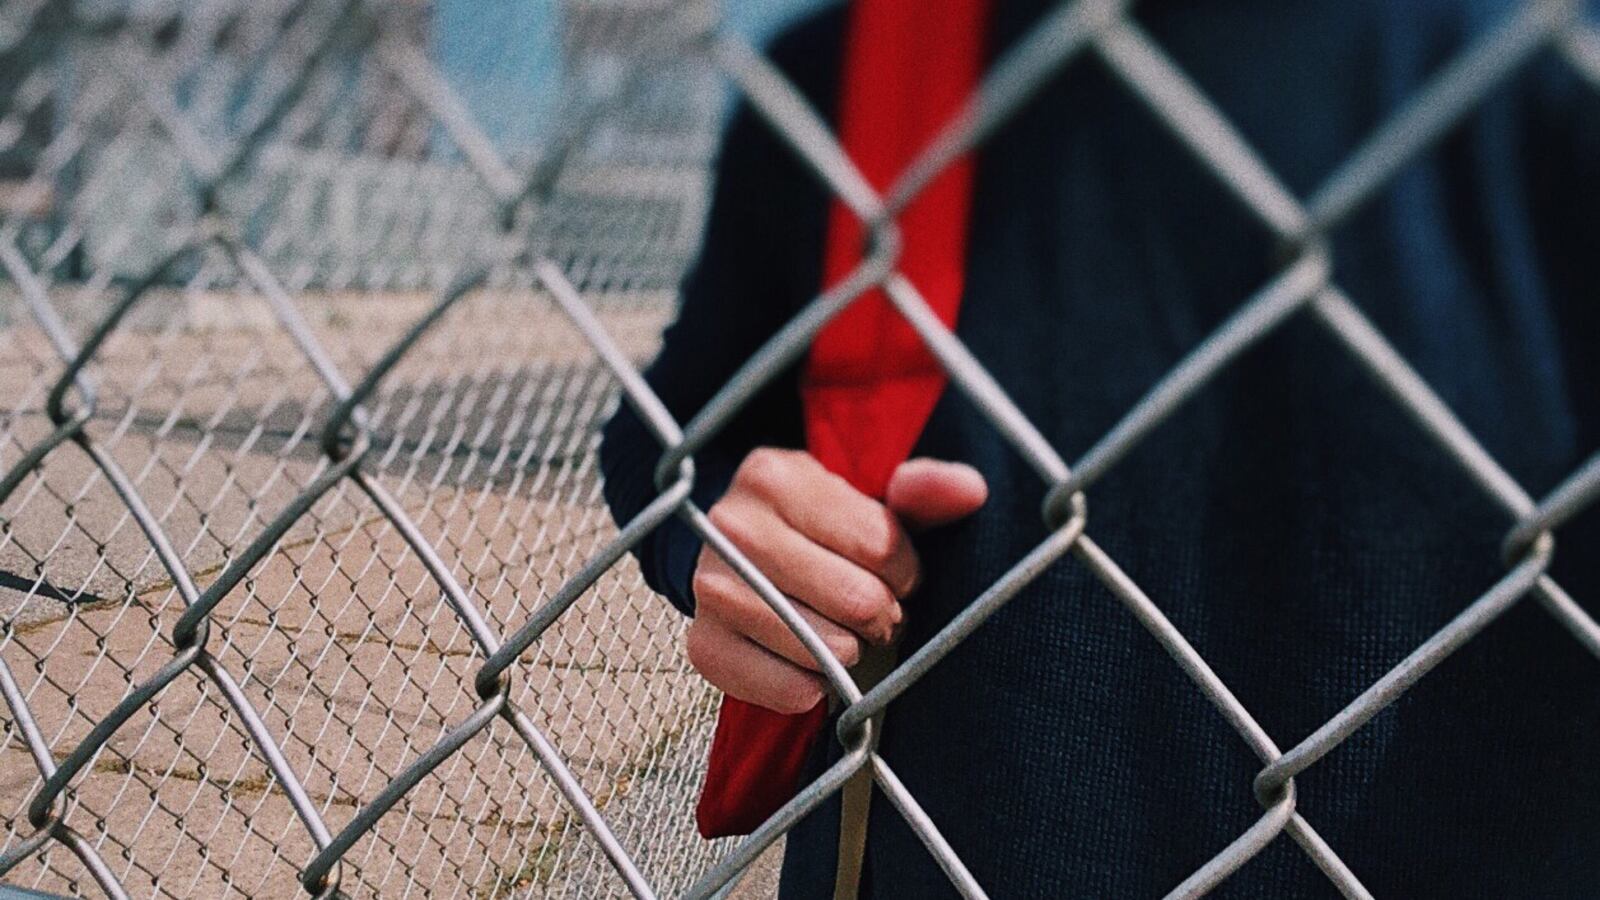 Close up of a student wearing a red backpack standing behind a wire fence.